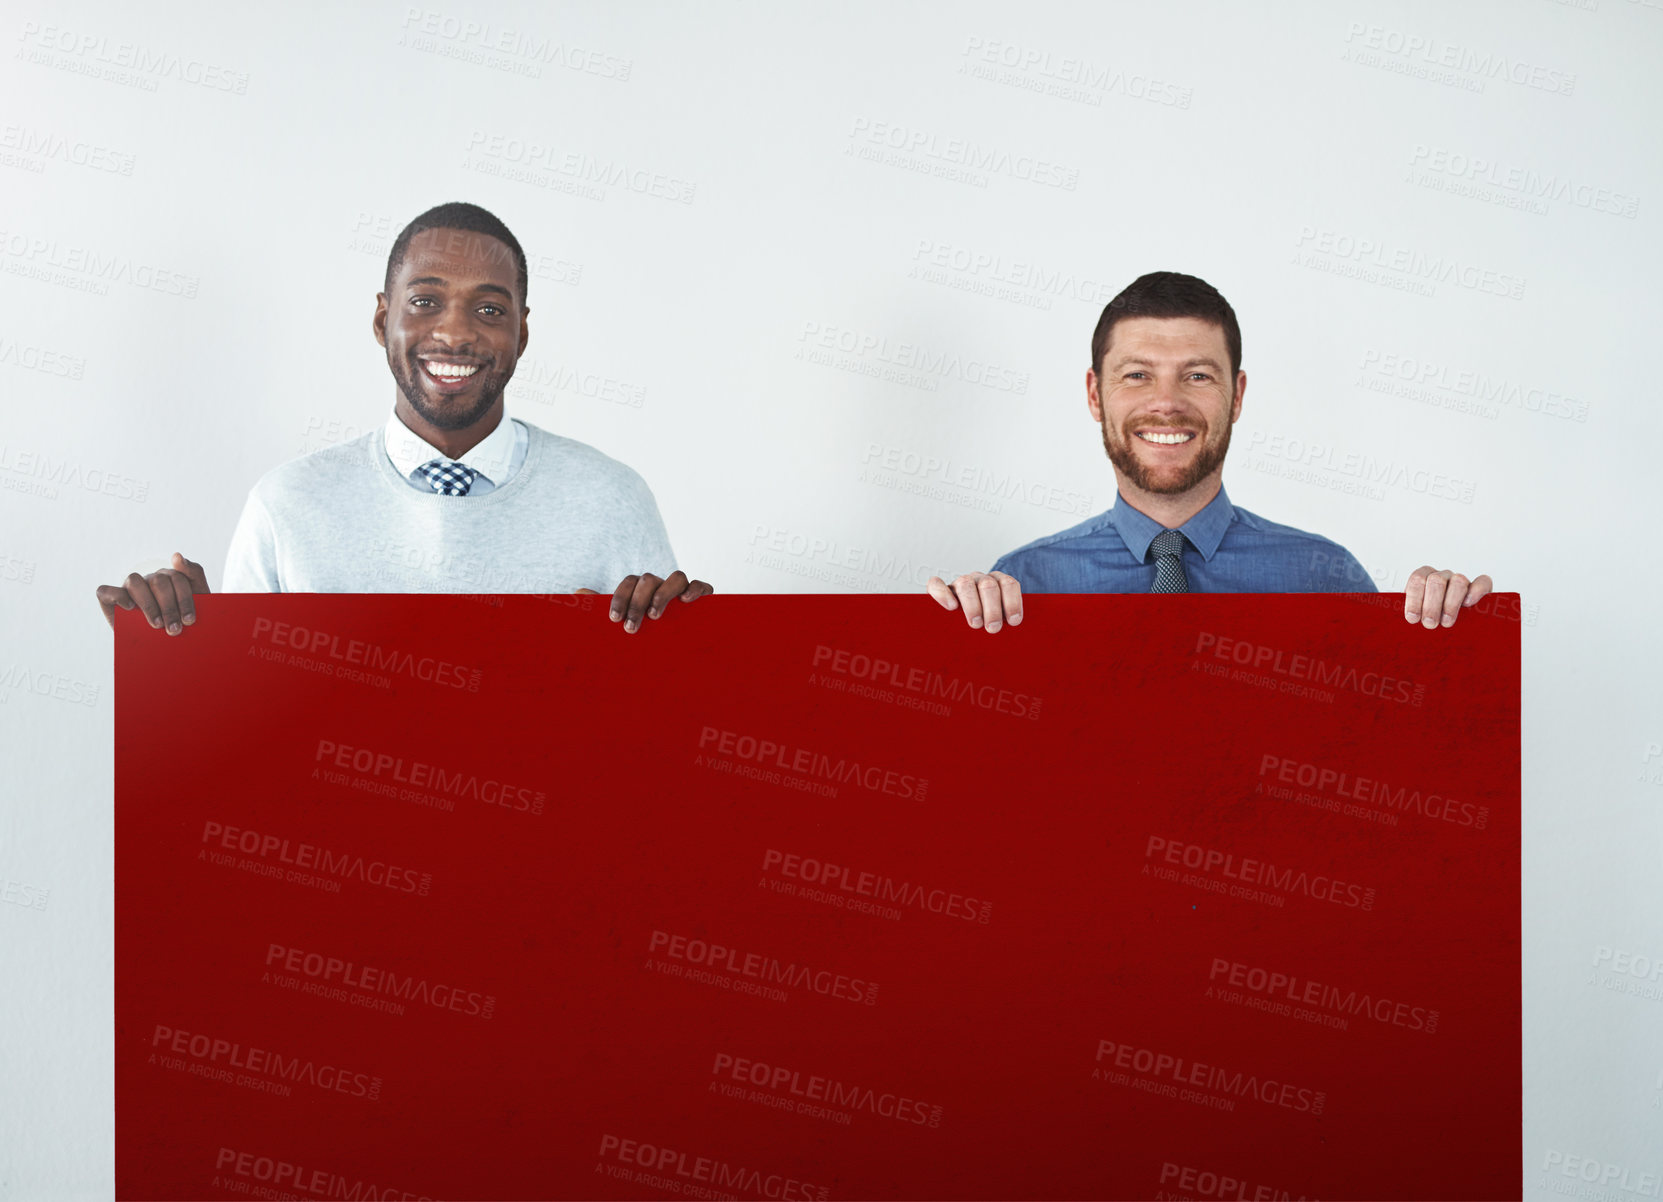 Buy stock photo Studio shot of two businessmen holding up a blank red placard